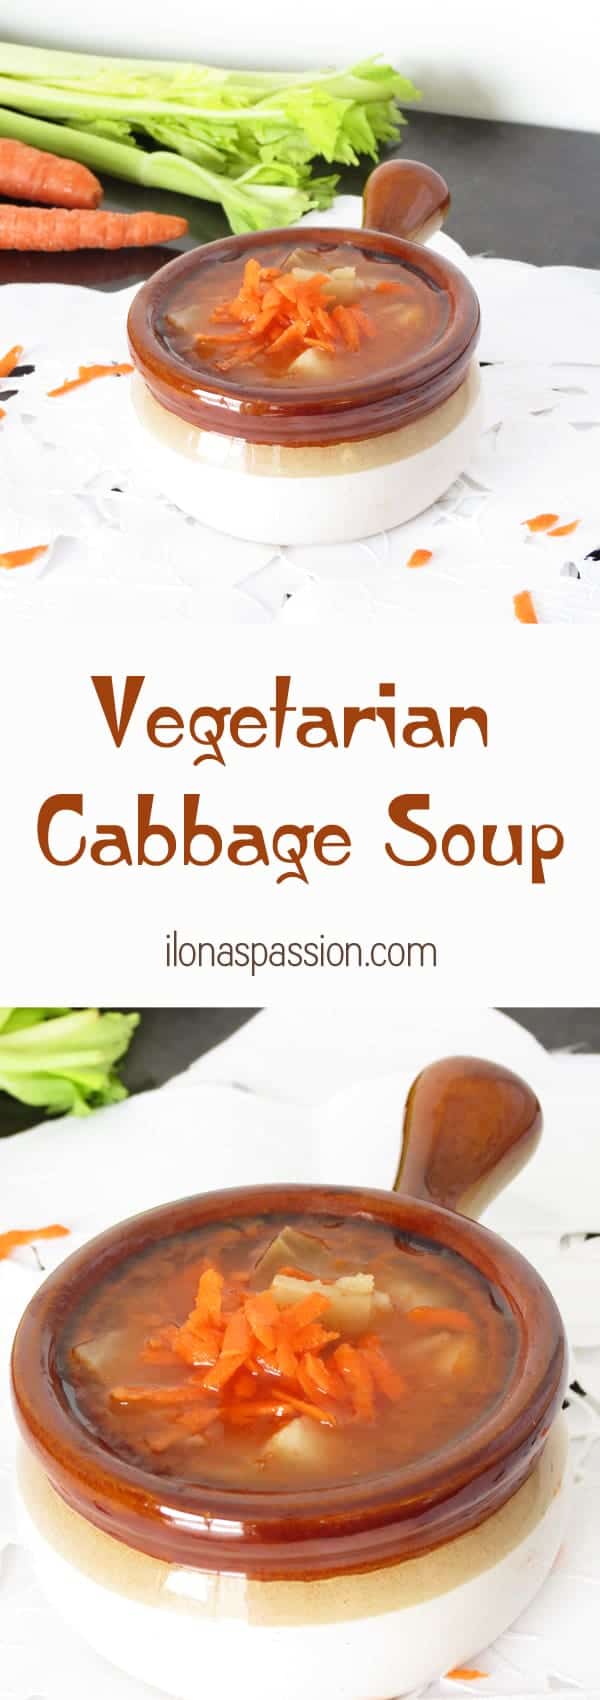 The Best Vegetarian Cabbage Soup by ilonaspassion.com